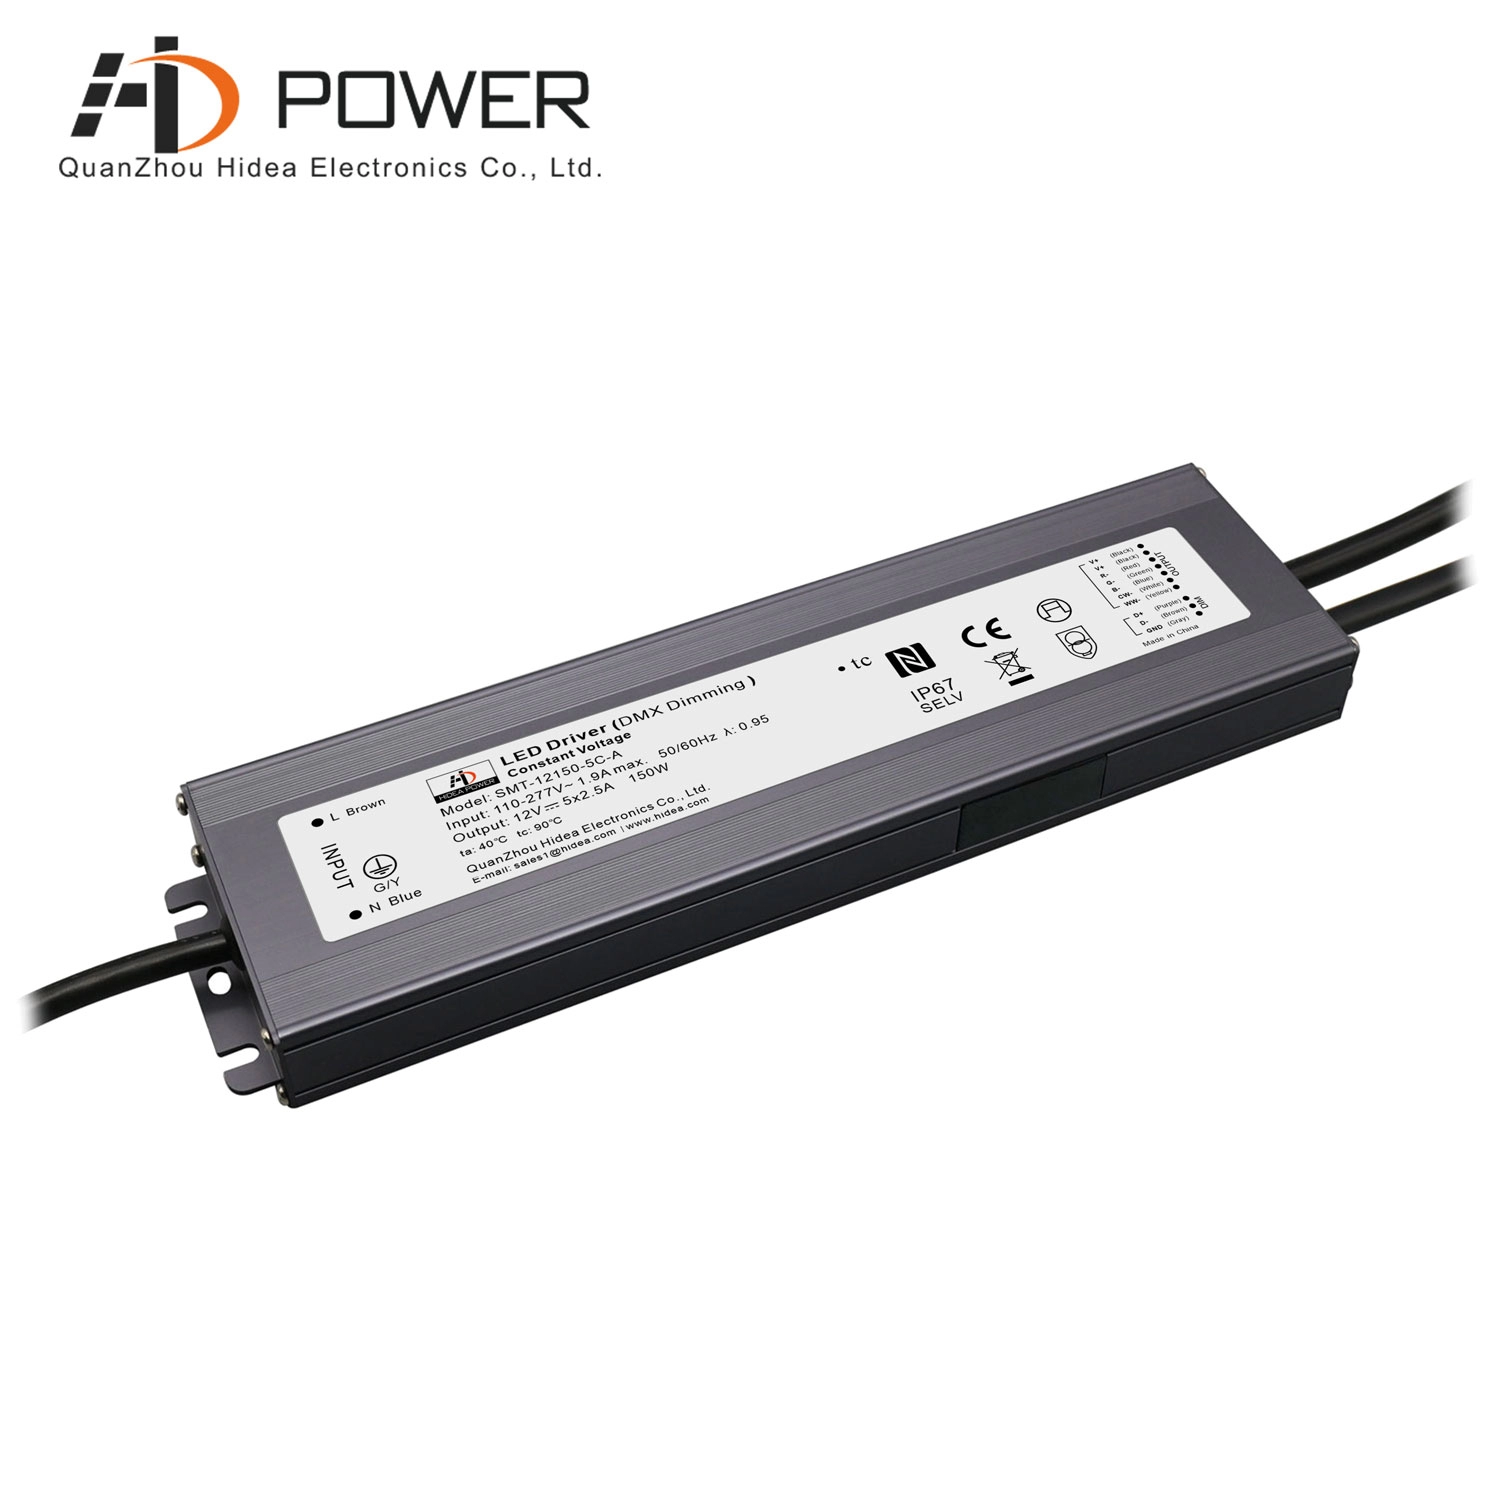 DMX led driver waterproof led power supply 12v 150w for colorful lights